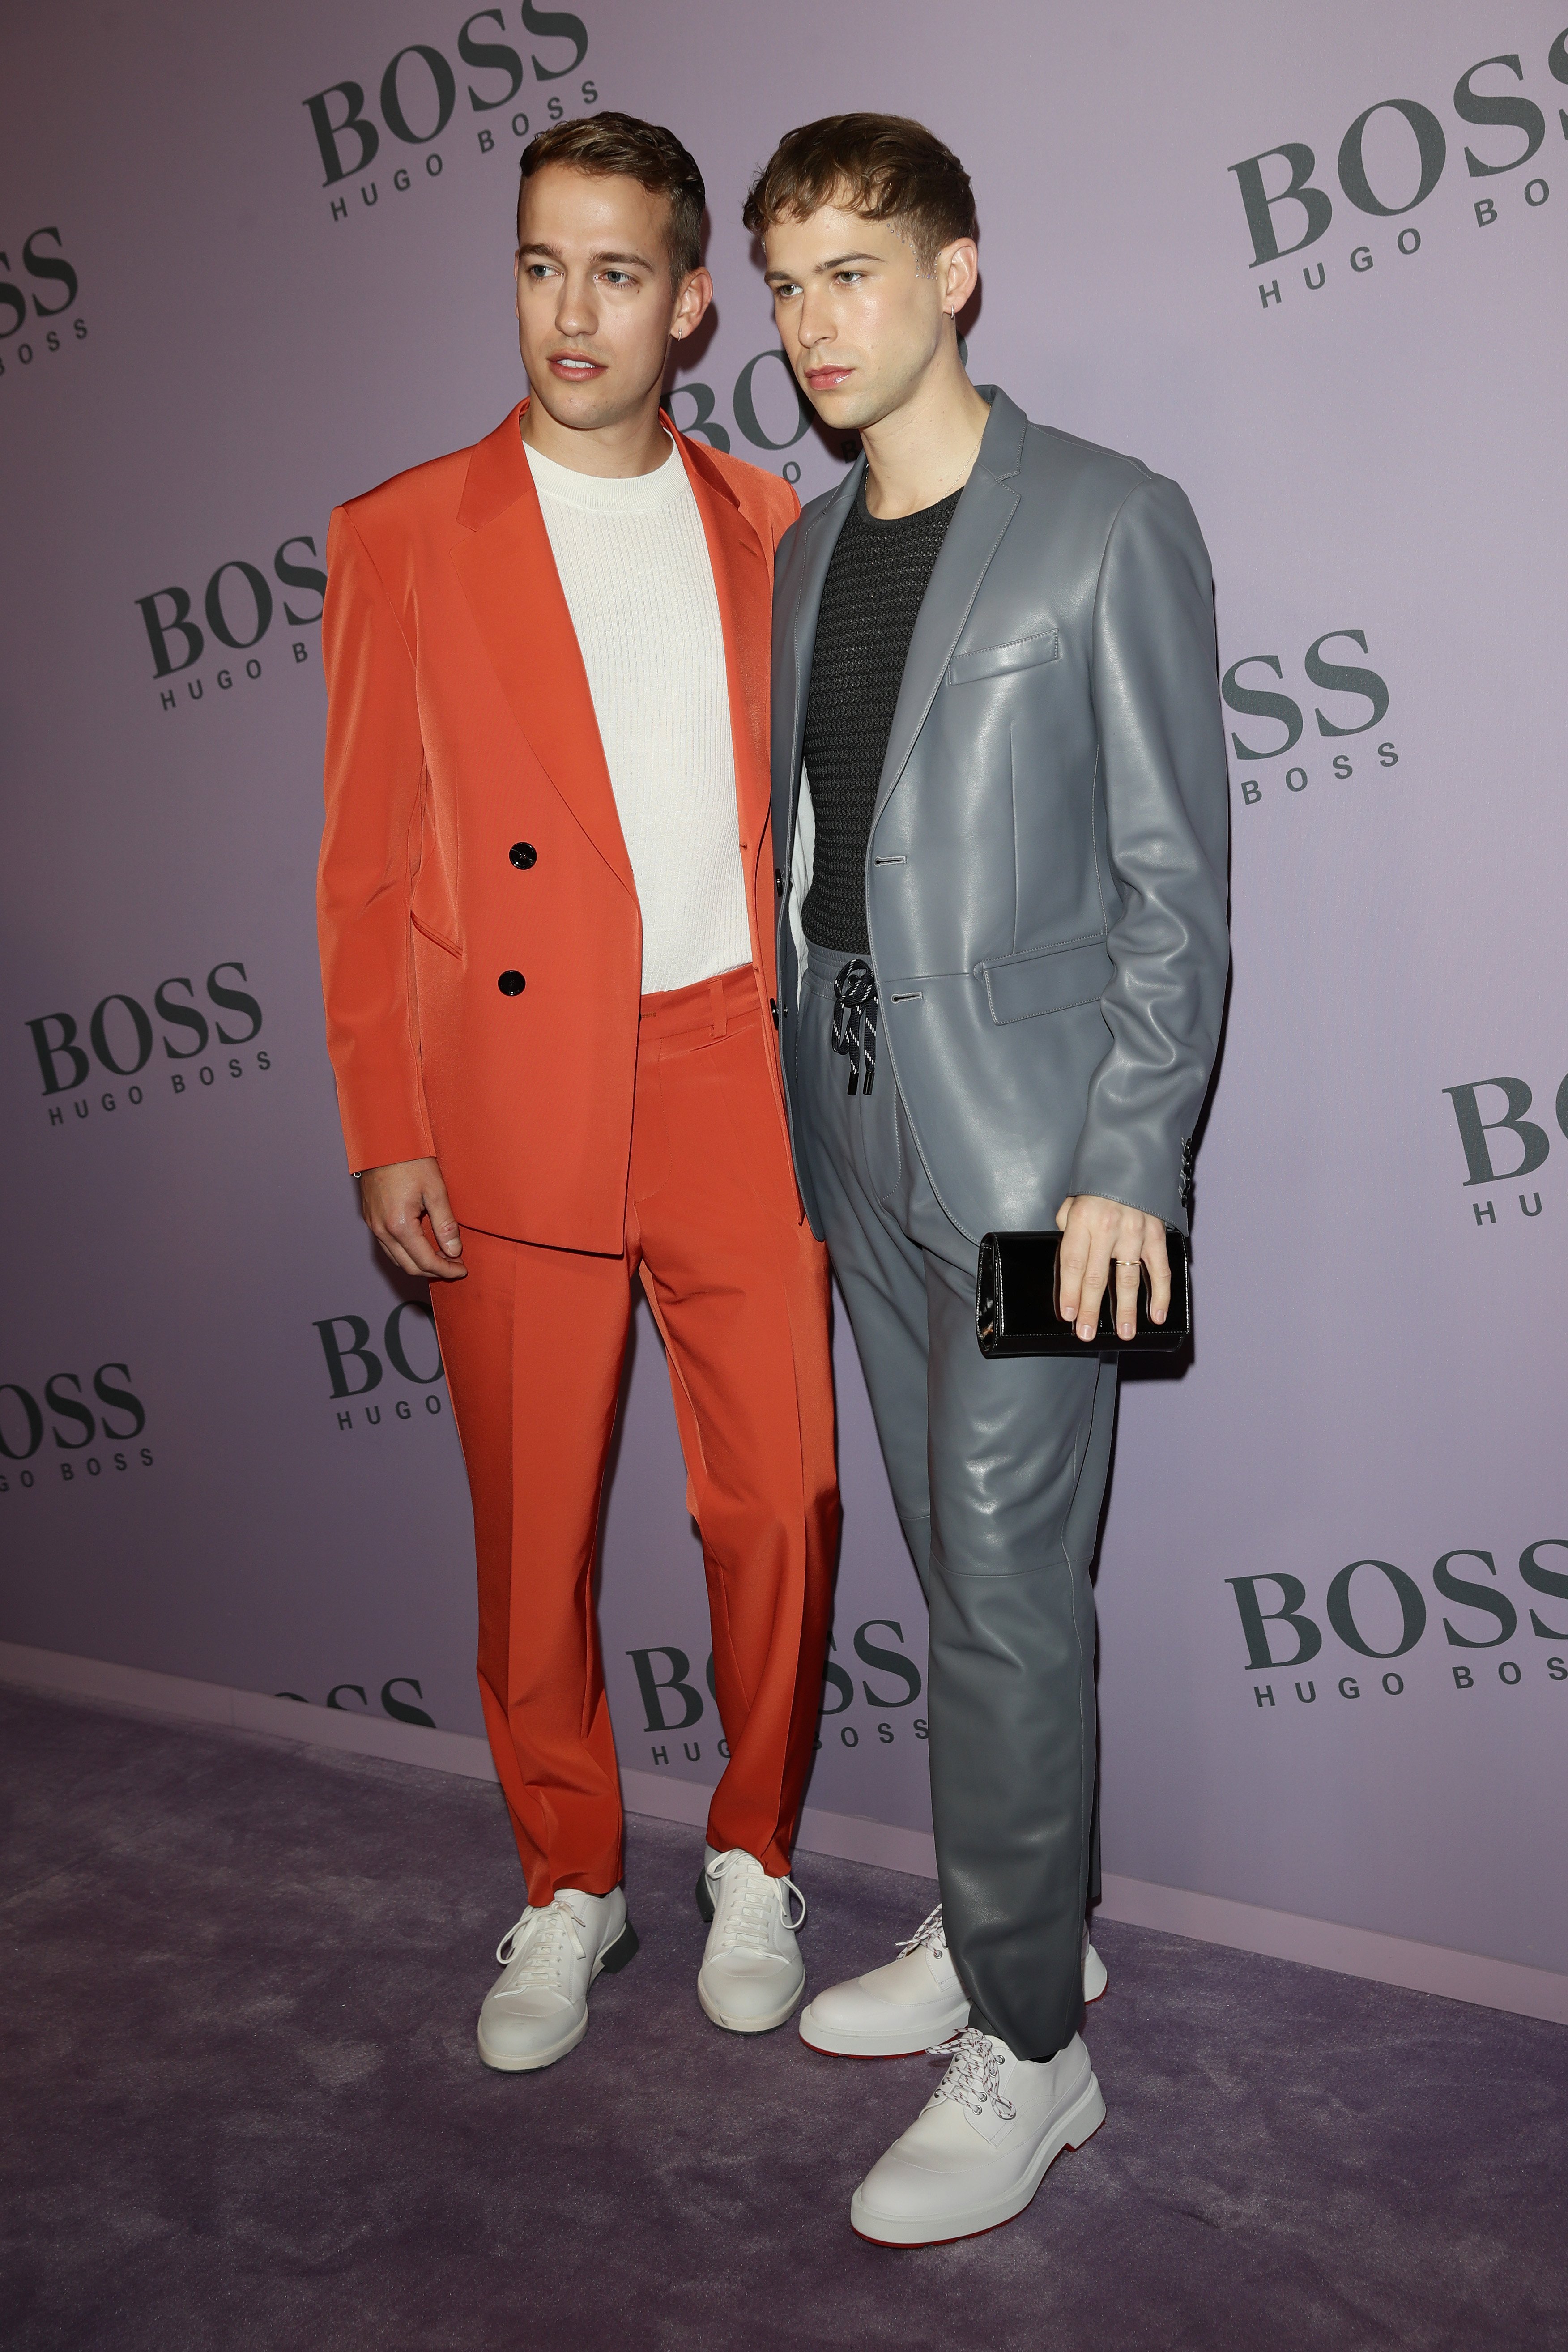 Peter Zurkuhlen and Tommy Dorfman at the BOSS fashion show on February 23, 2020 | Source: Getty Images